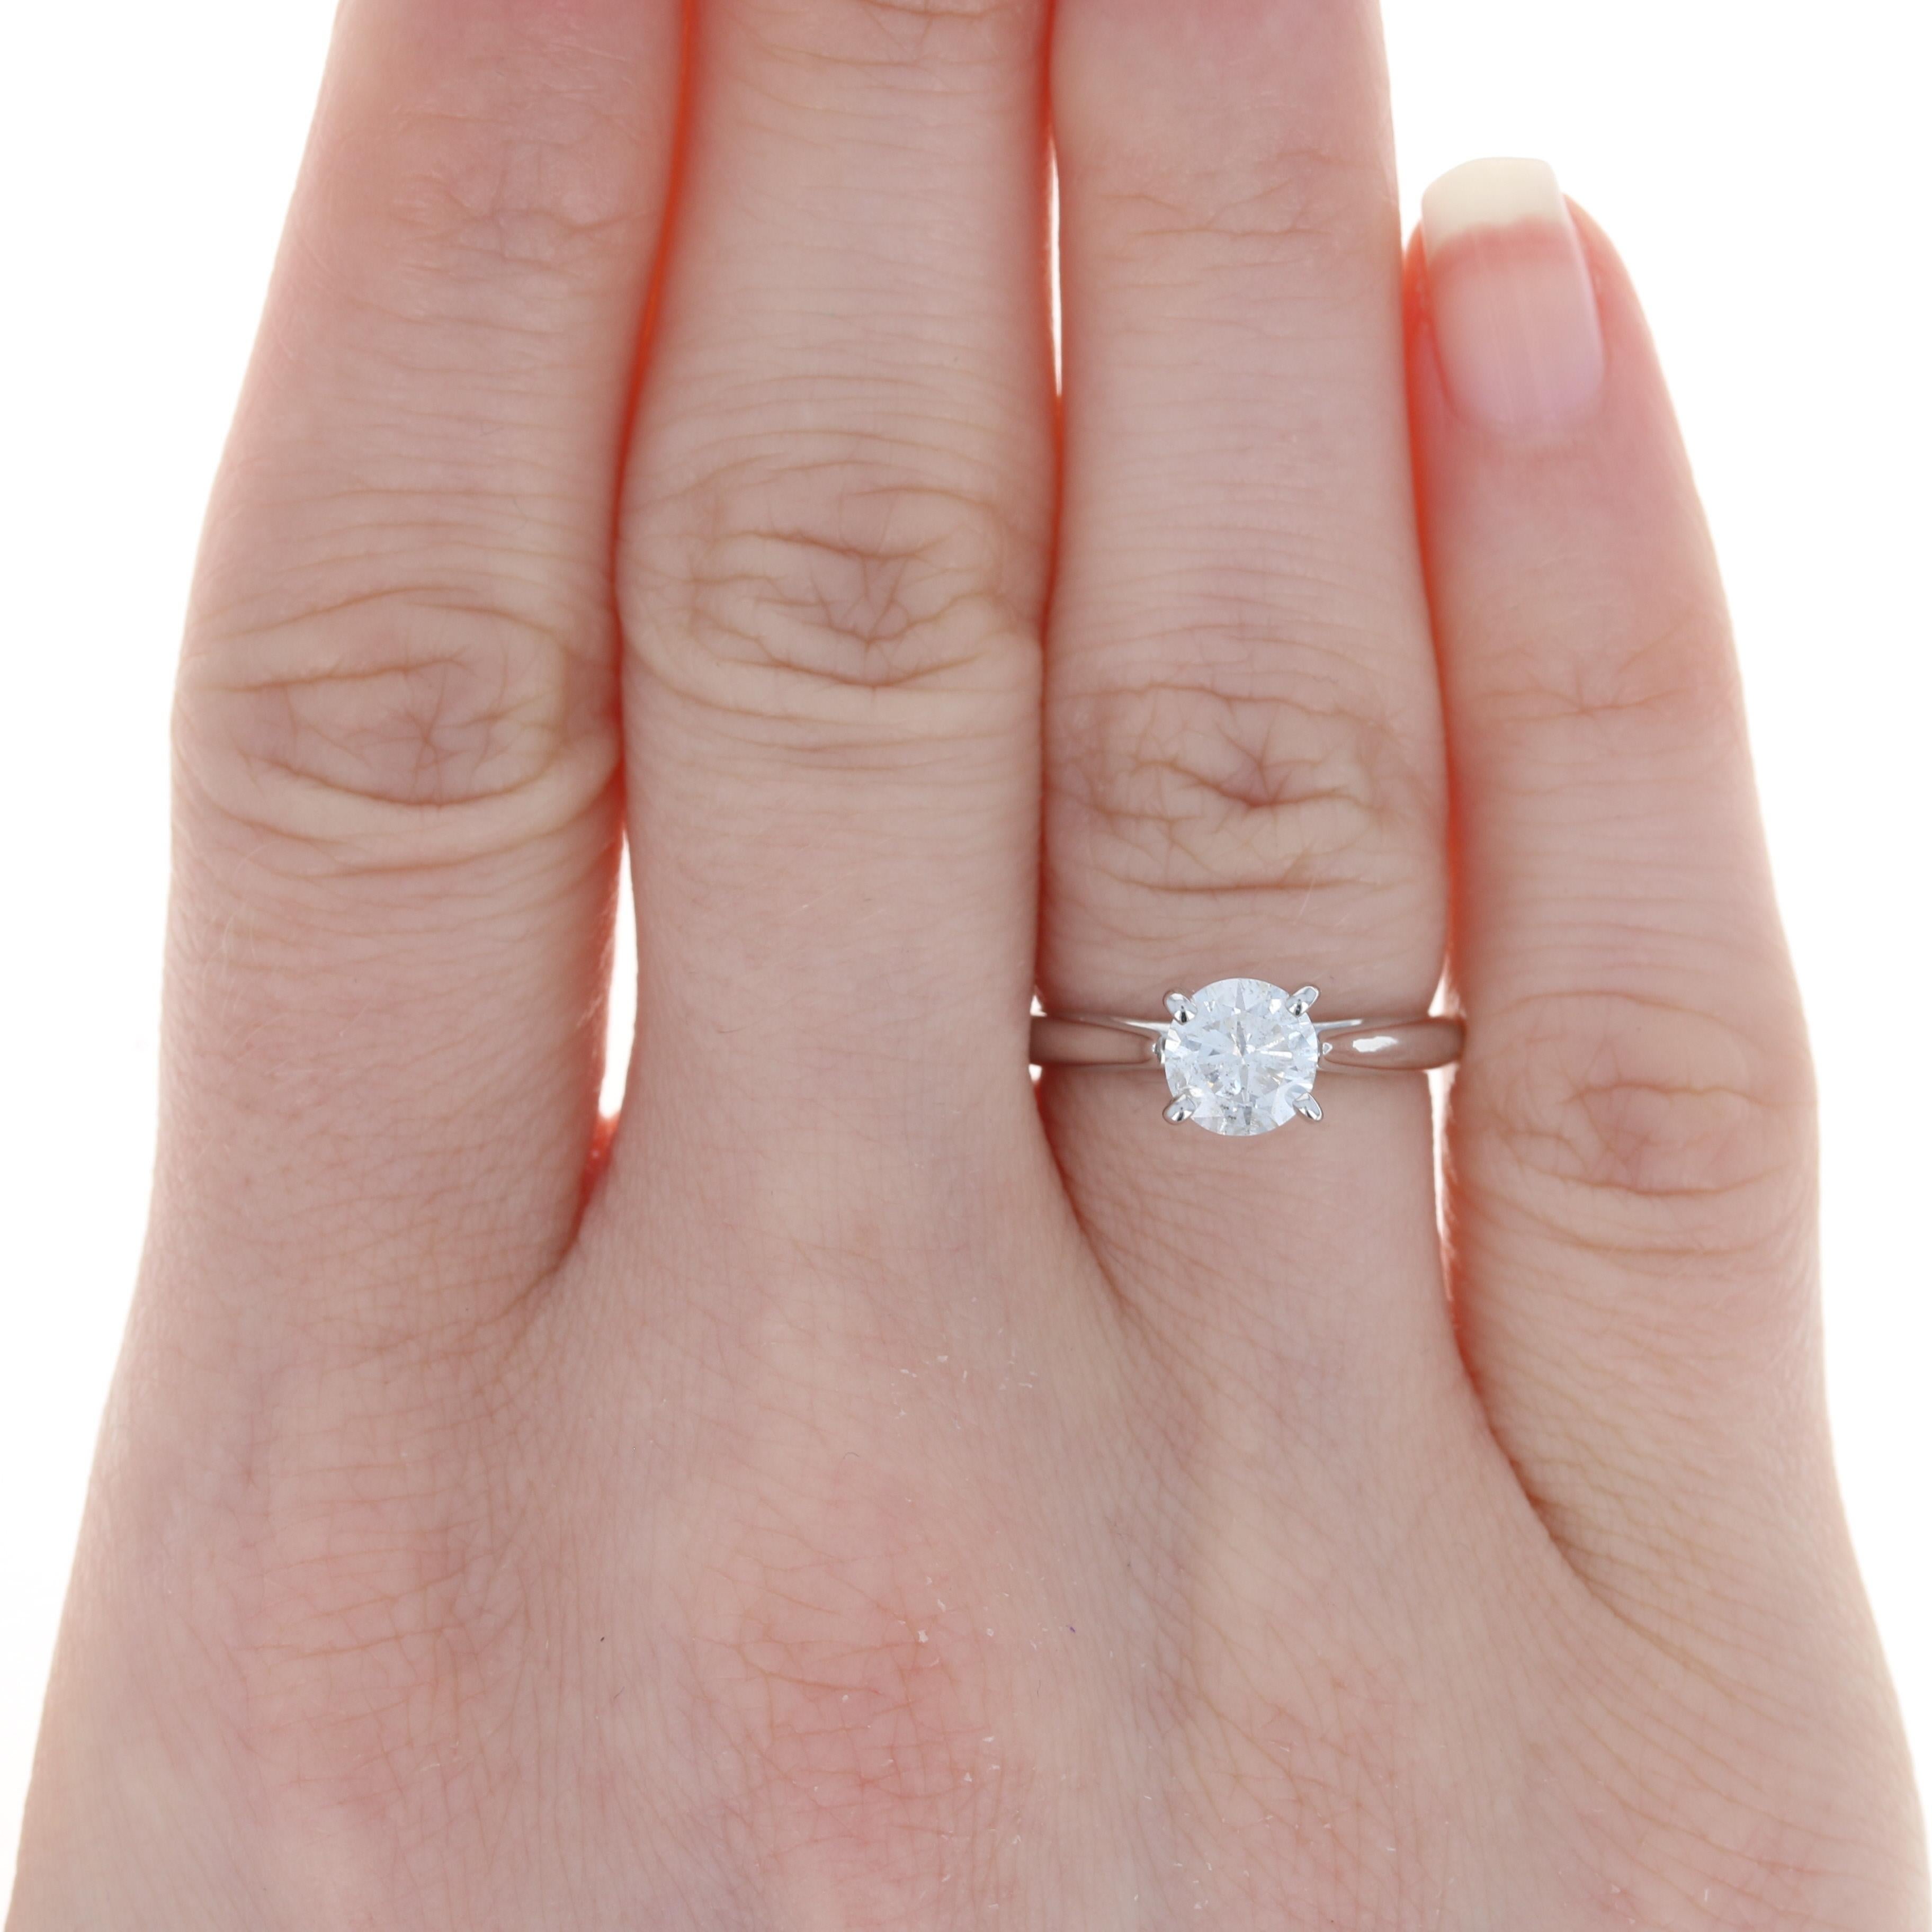 Size: 5 1/4
 Sizing Fee: Down 2 sizes for $20 or Up 2 sizes for $25
 
 Brand: Scott Kay
 
 Metal Content: 14k White Gold
 
 Stone Information: 
 Natural Diamond Solitaire
 Carat: .96ct (weighed)
 Cut: Round Brilliant
 Color: E
 Clarity: I2
 
